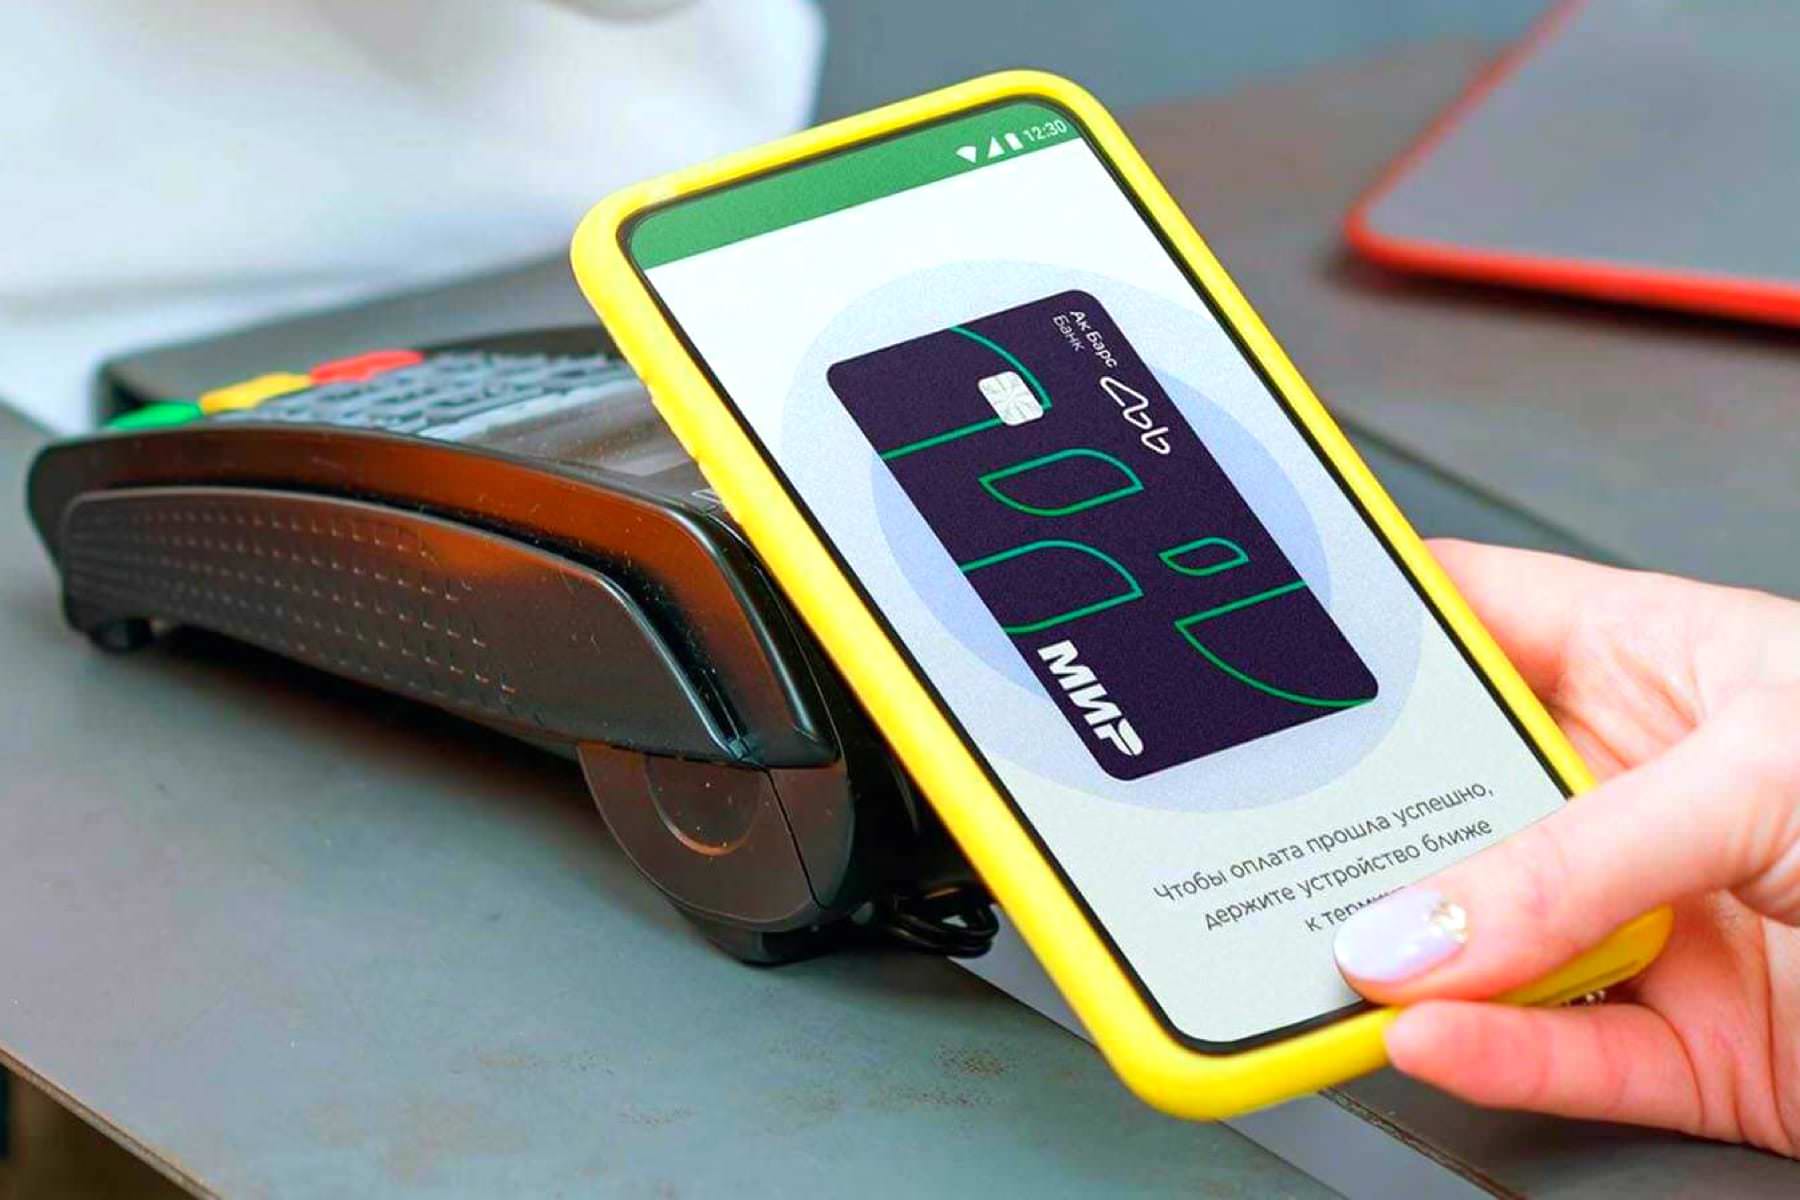 The Russian payment system SBP will turn a smartphone into a payment terminal